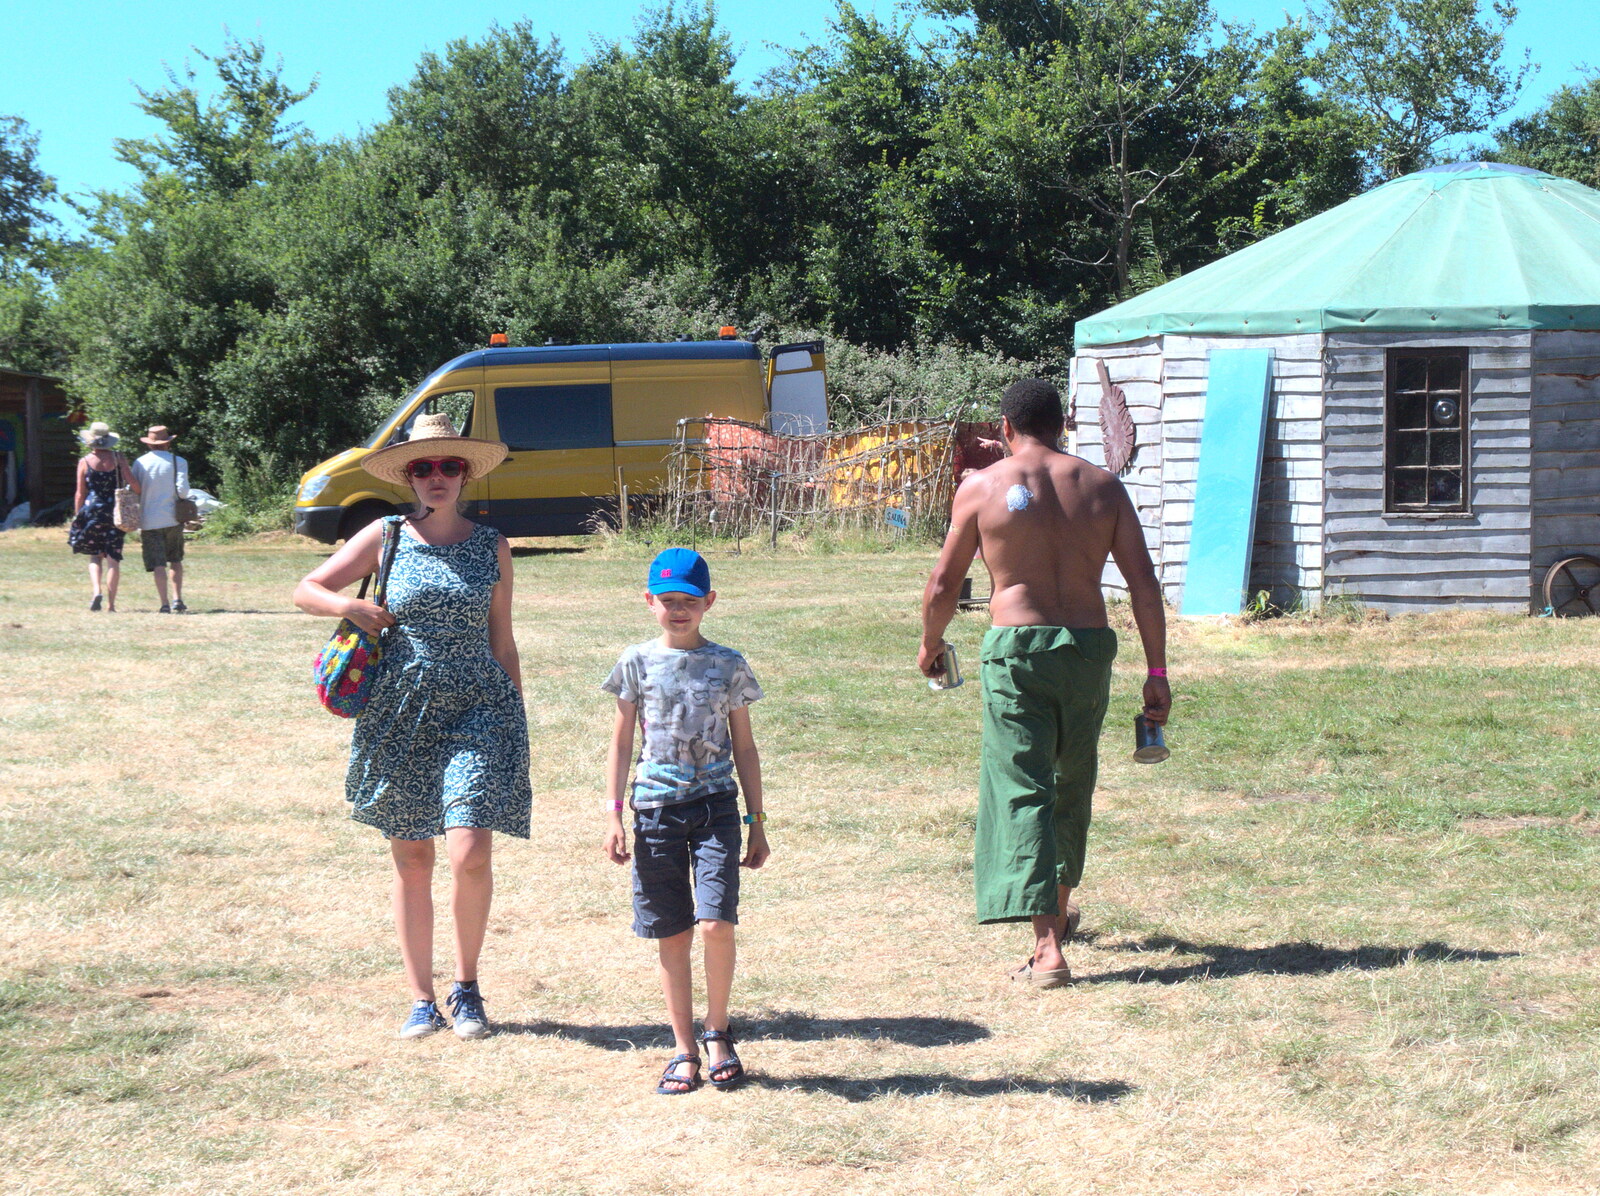 Isobel and Fred wander down from the campsite from WoW Festival, Burston, Norfolk - 29th June - 1st July 2018